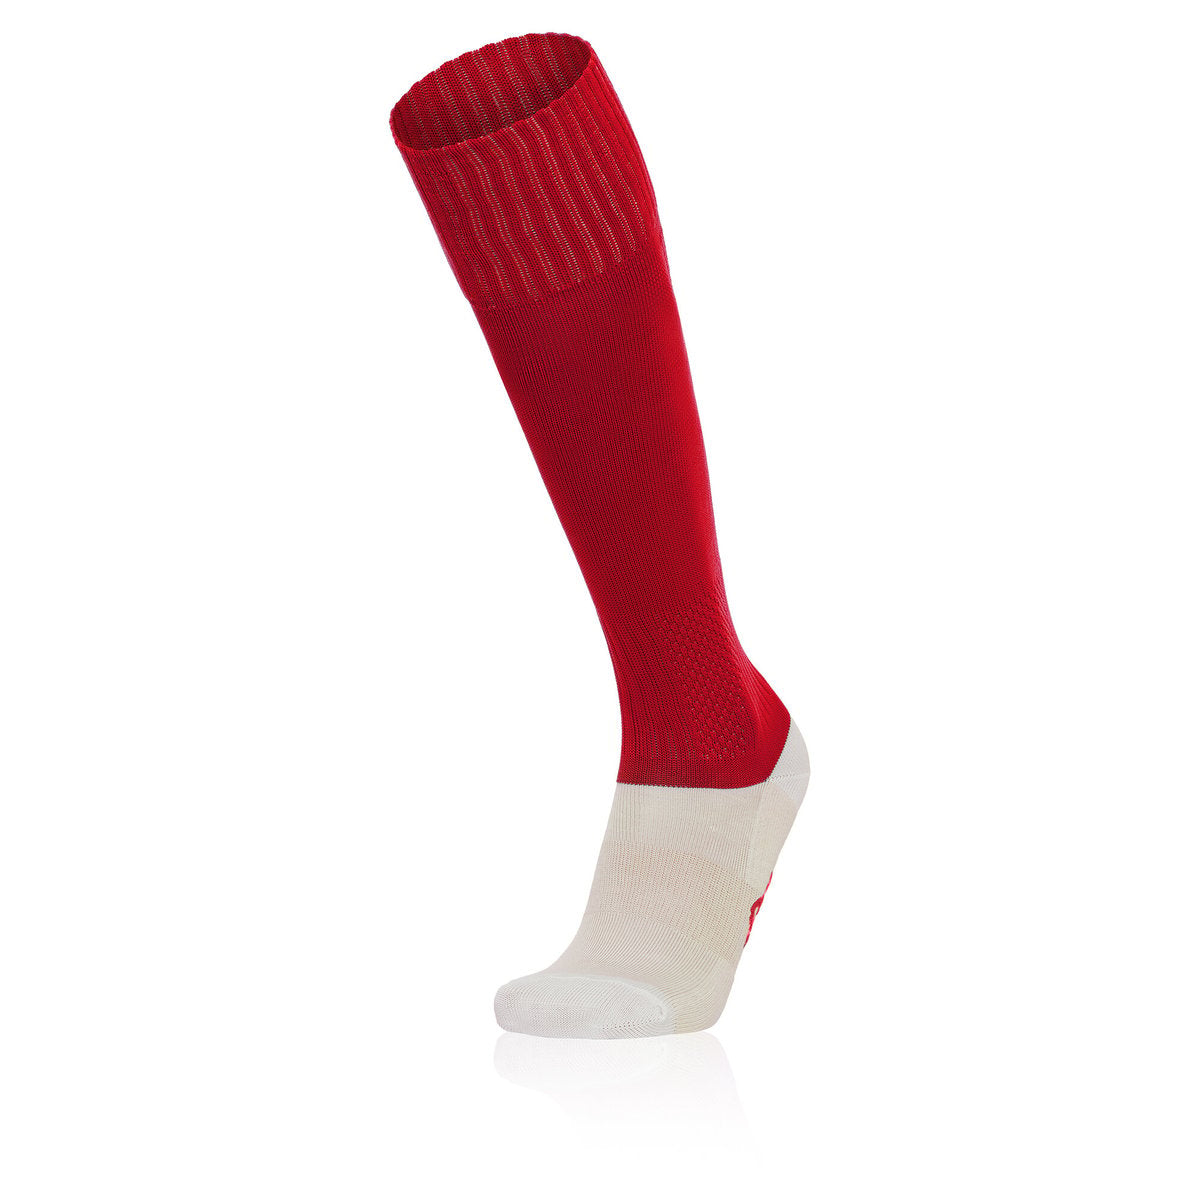 Macron Round Match Sock - Red (Pack of 5)